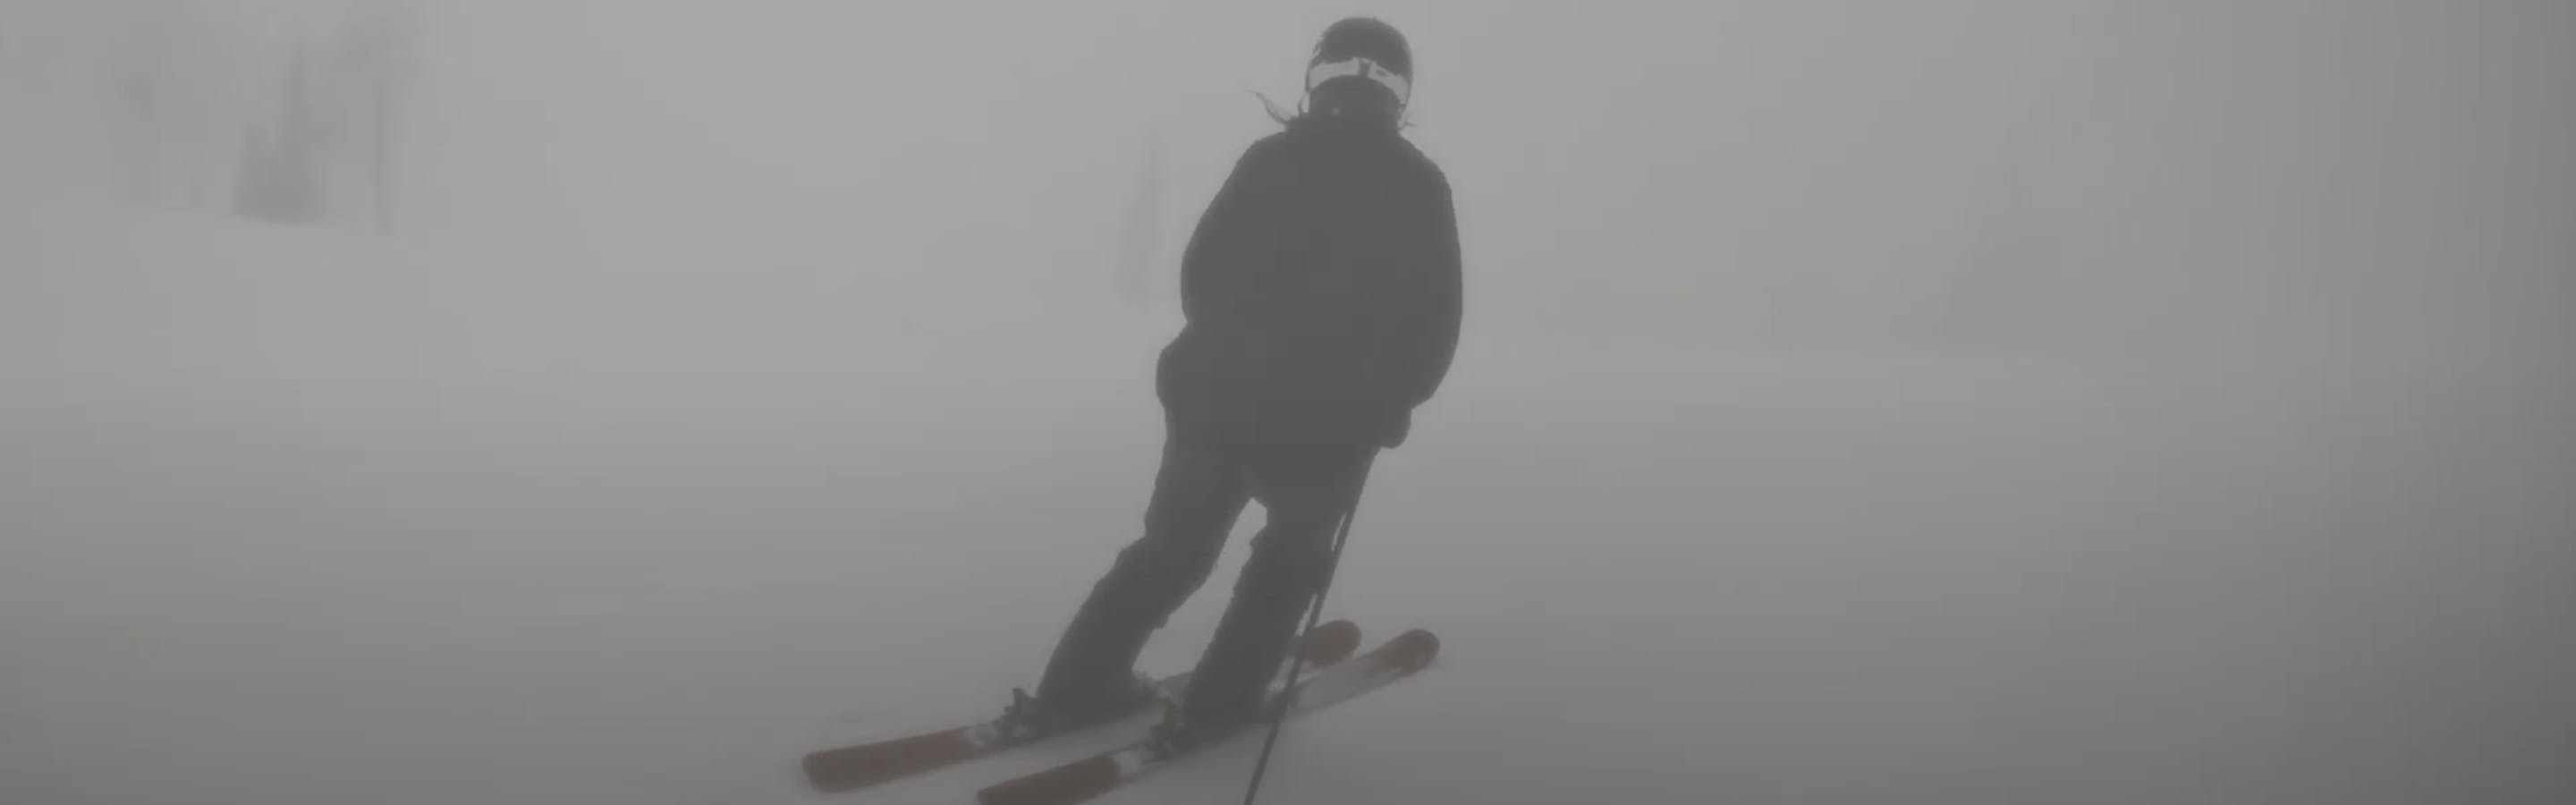 A skier carving down a mountain. 